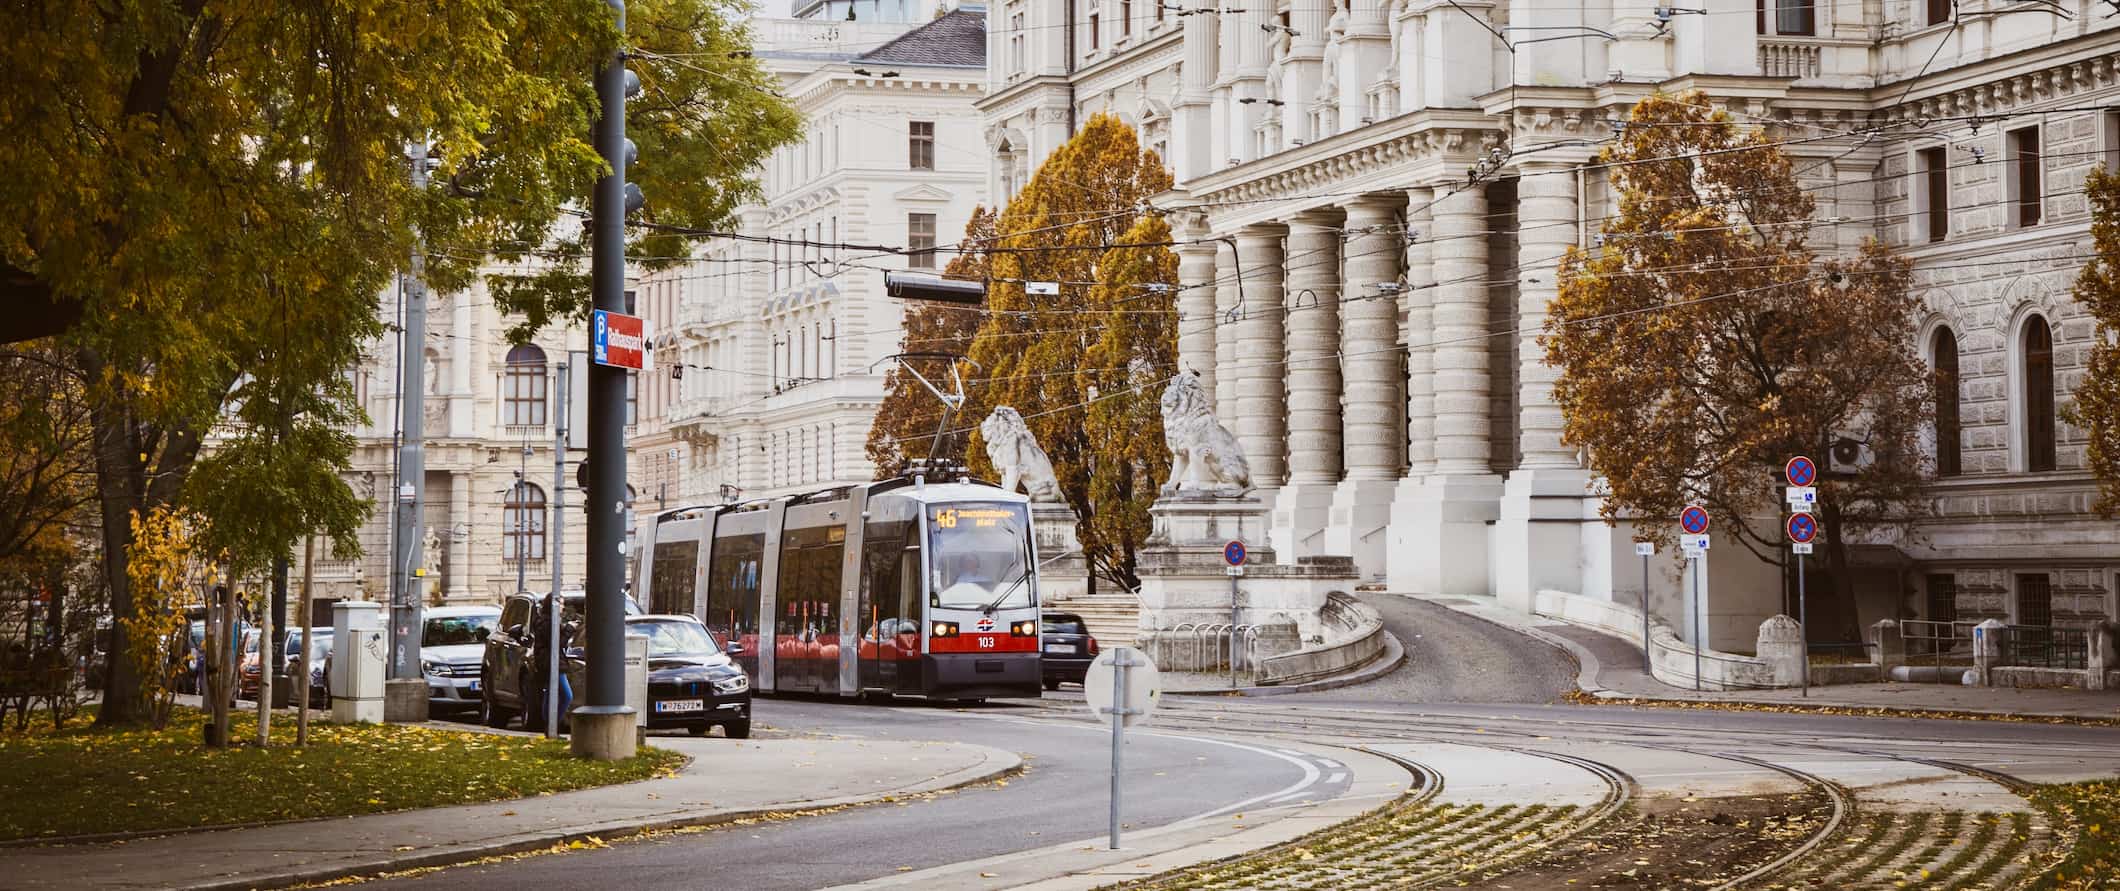 Public transportation going around the stunning downtown of Vienna, Austria on a sunny day